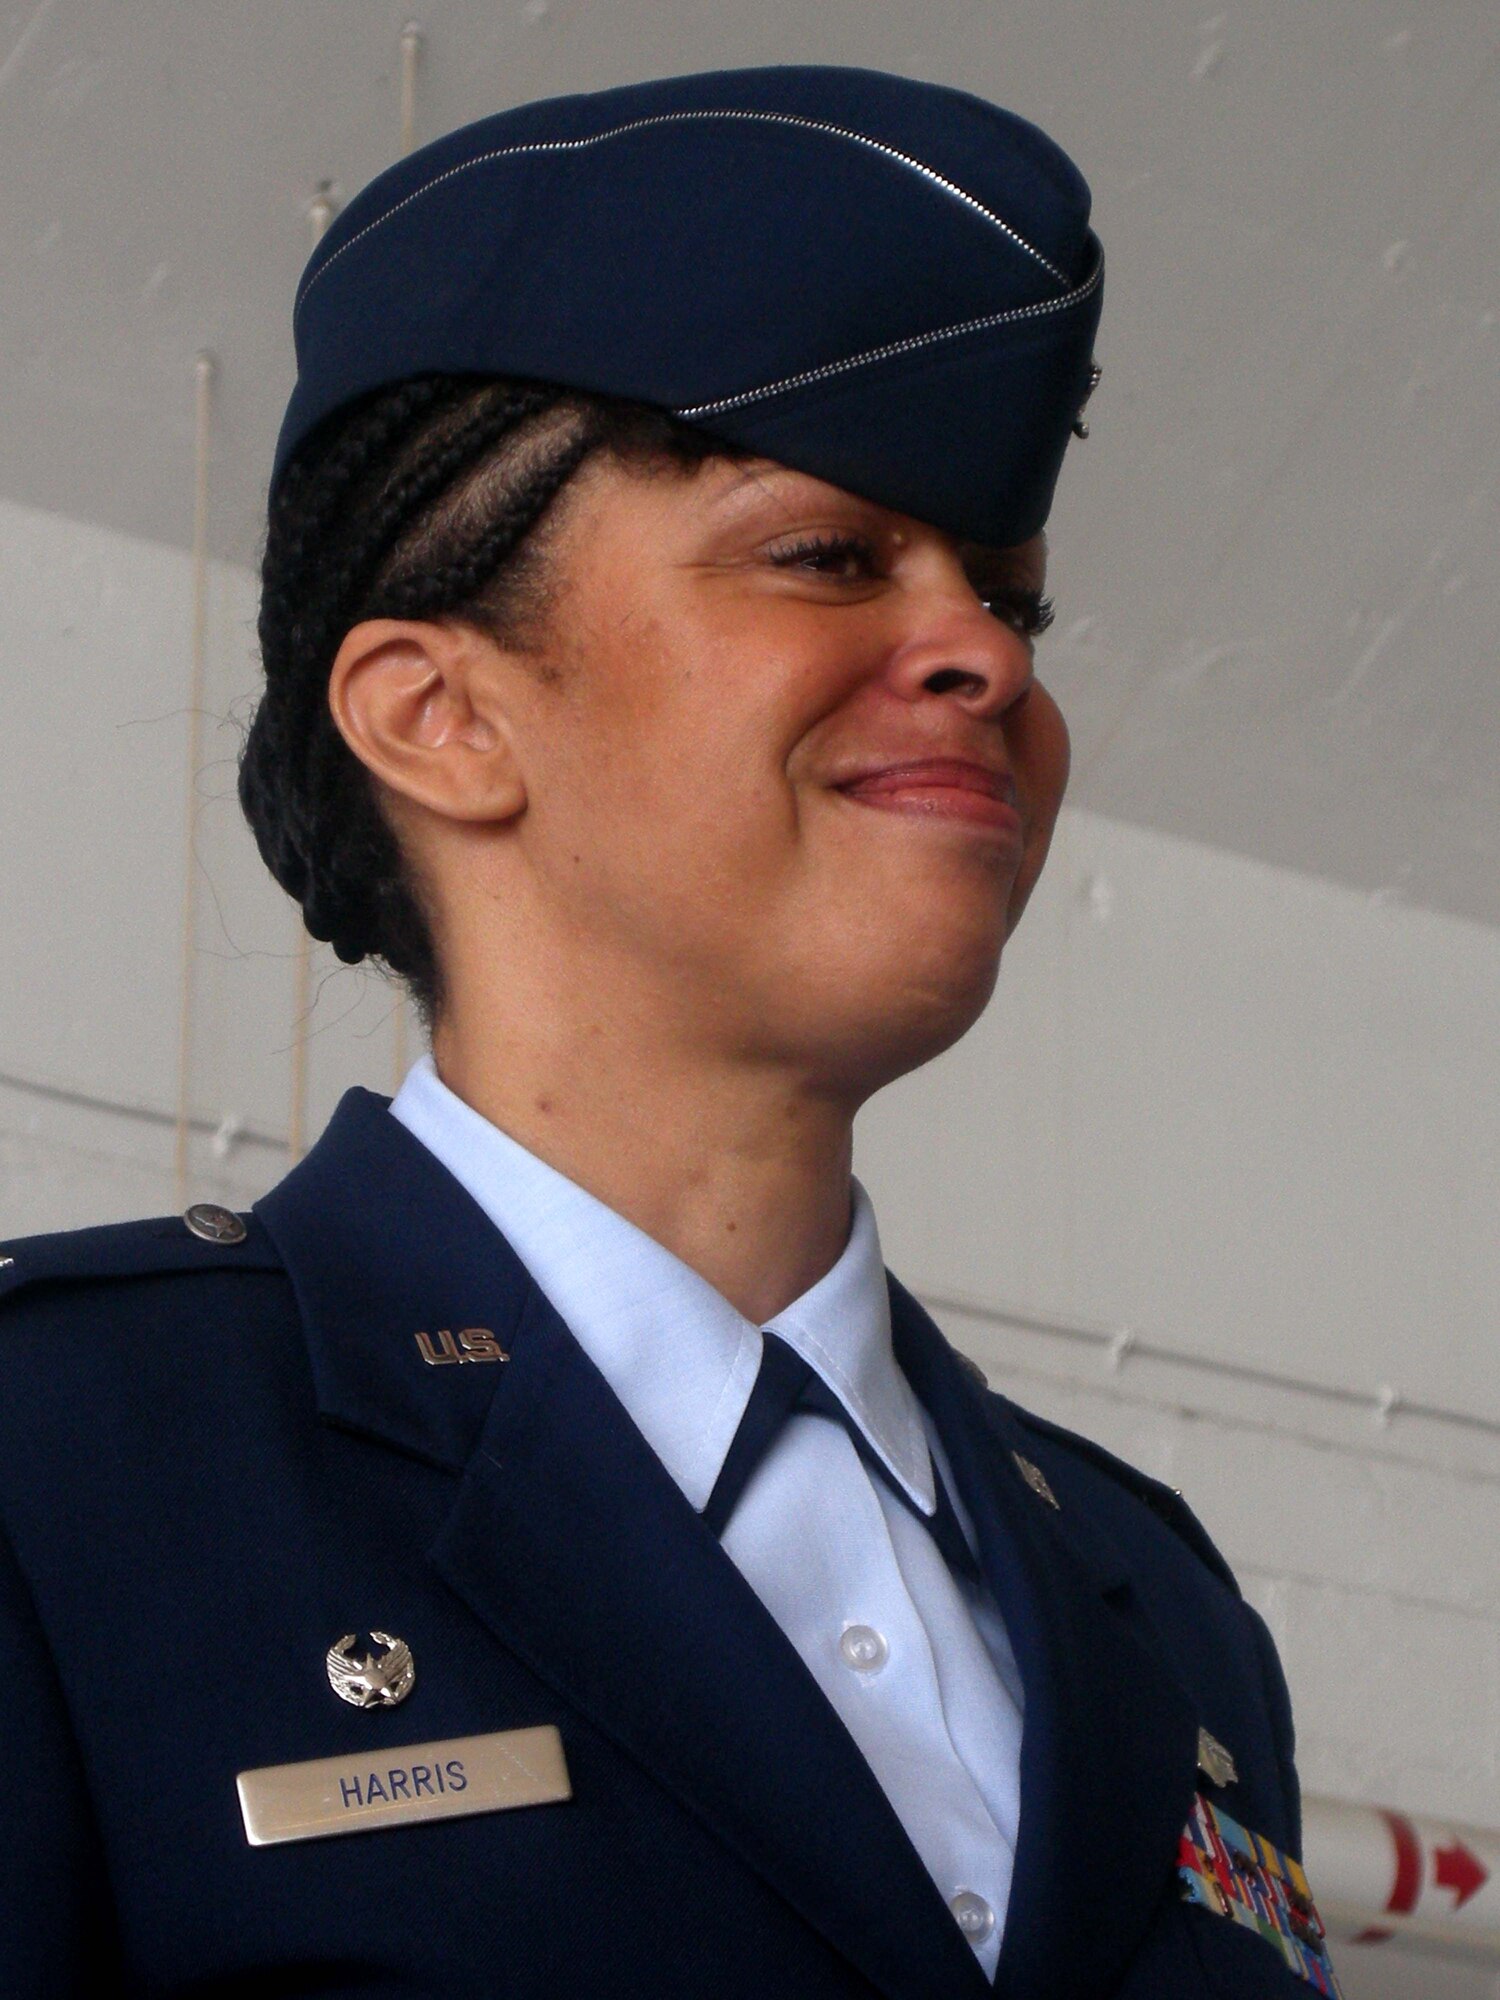 ANDREWS AIR FORCE BASE, Md. -- Col. Stayce D. Harris, 459th Air Refueling Wing commander, smiles emotionally as wing members render a final salute to her during the wing change of command ceremony here July 13. Colonel Harris handed the guidon to current Vice Commander and incoming Commander Col. Tim Cahoon, who assumes command Aug. 1. Colonel Harris moves on to become the Mobilization Assistant to the Director, Strategic Plans, Requirements and Programs, Headquarters Air Mobility Command, Scott Air Force Base, Ill. (U.S. Air Force photo/Tech. Sgt. Amaani Lyle)